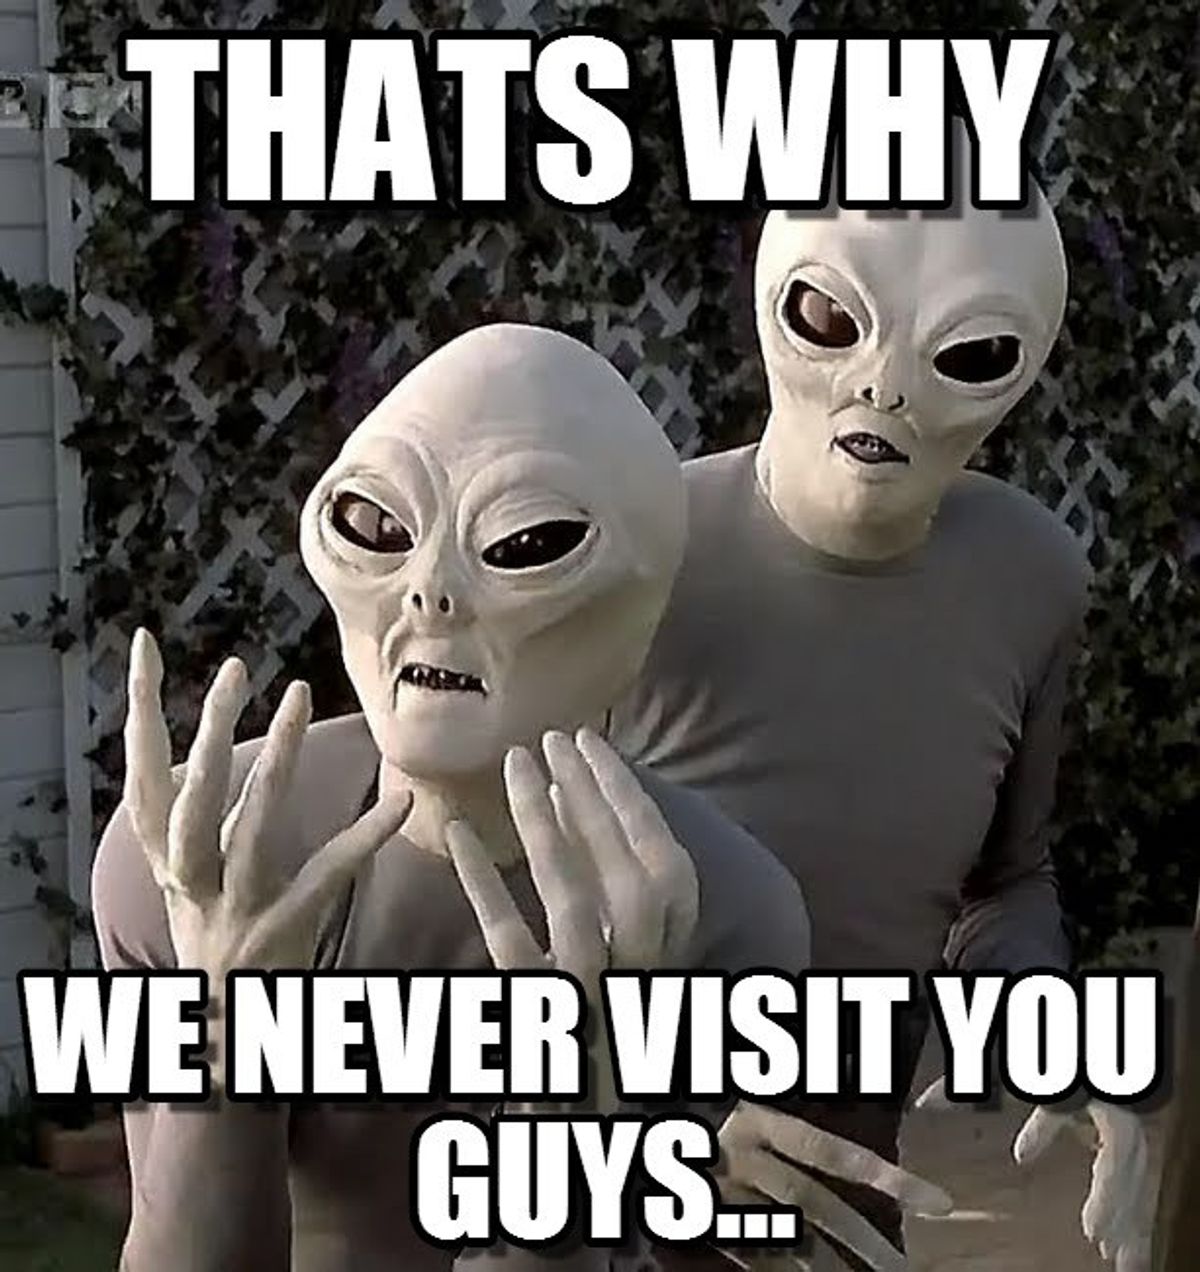 11 Reasons Why Aliens Would Not Want To Visit Earth